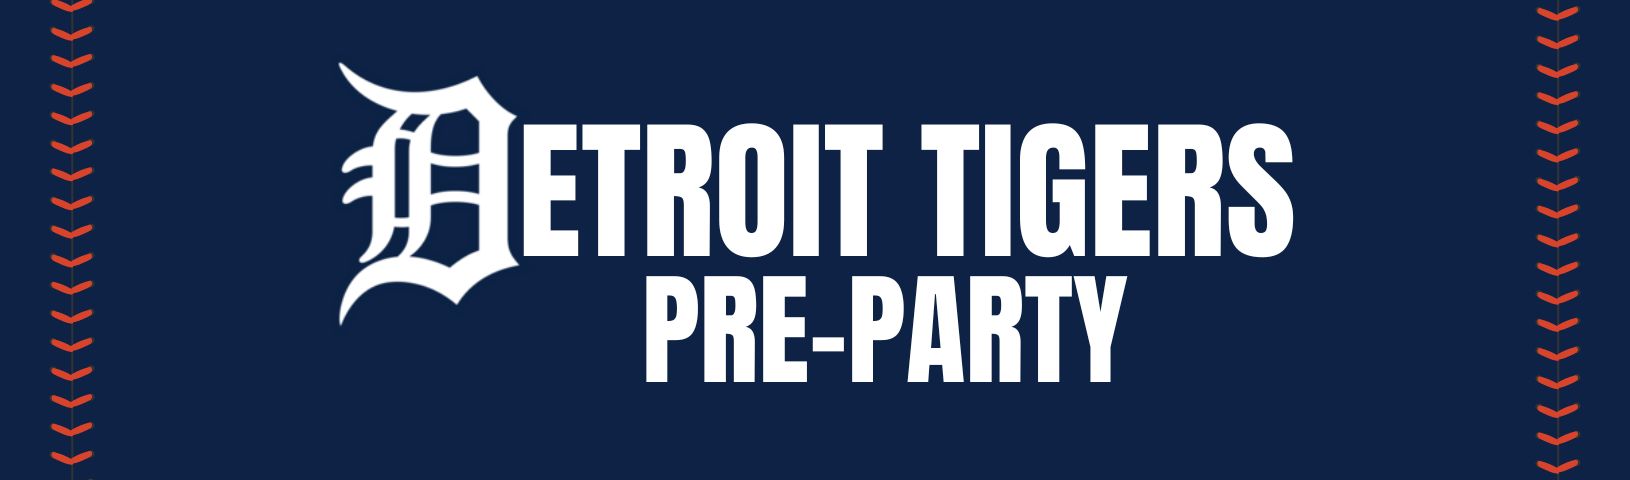 Tigers Pre-Party Background Image